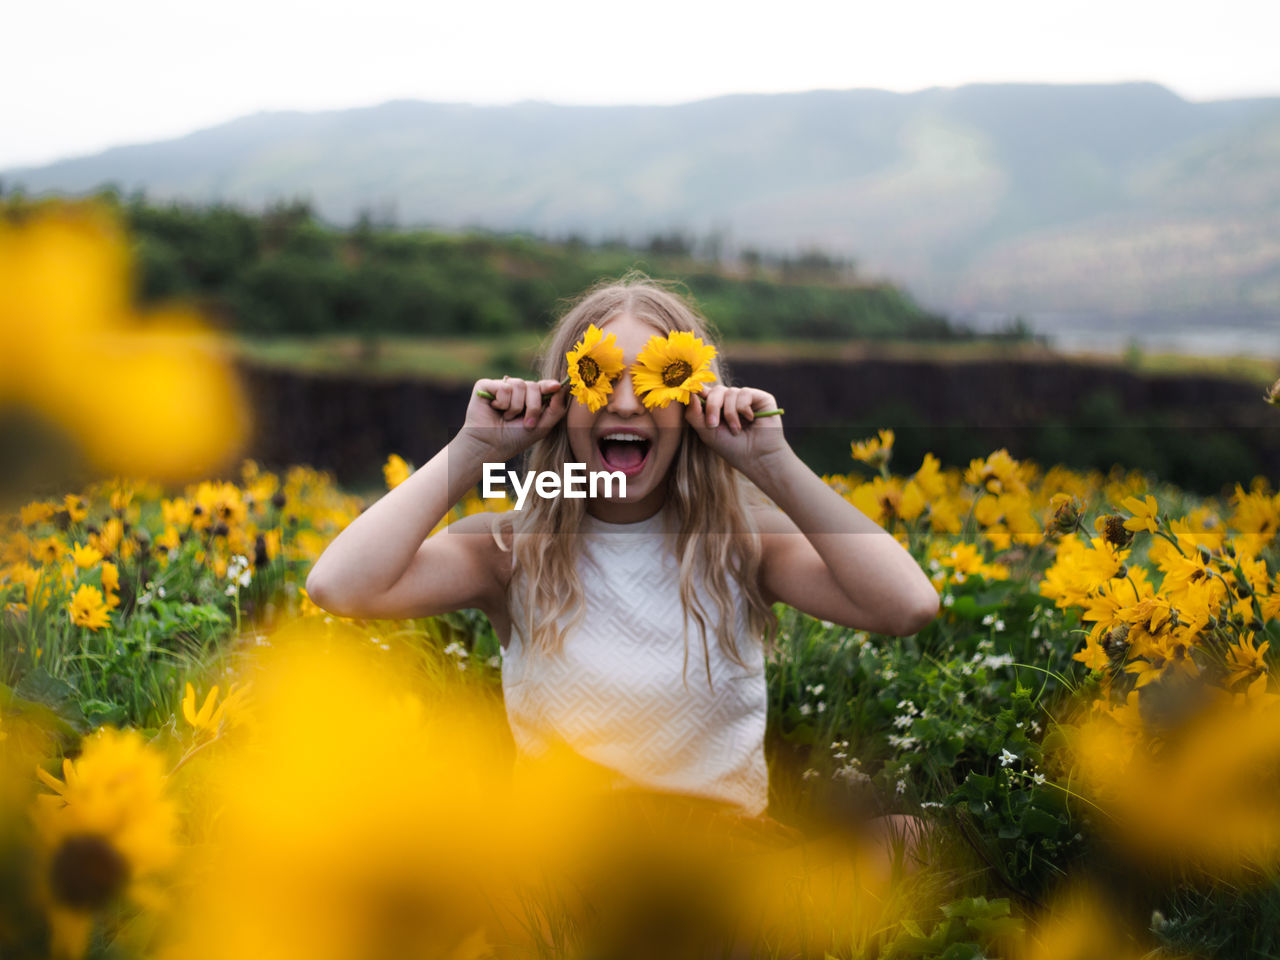 Excited woman shouting while holding flowers over eyes by plants against sky